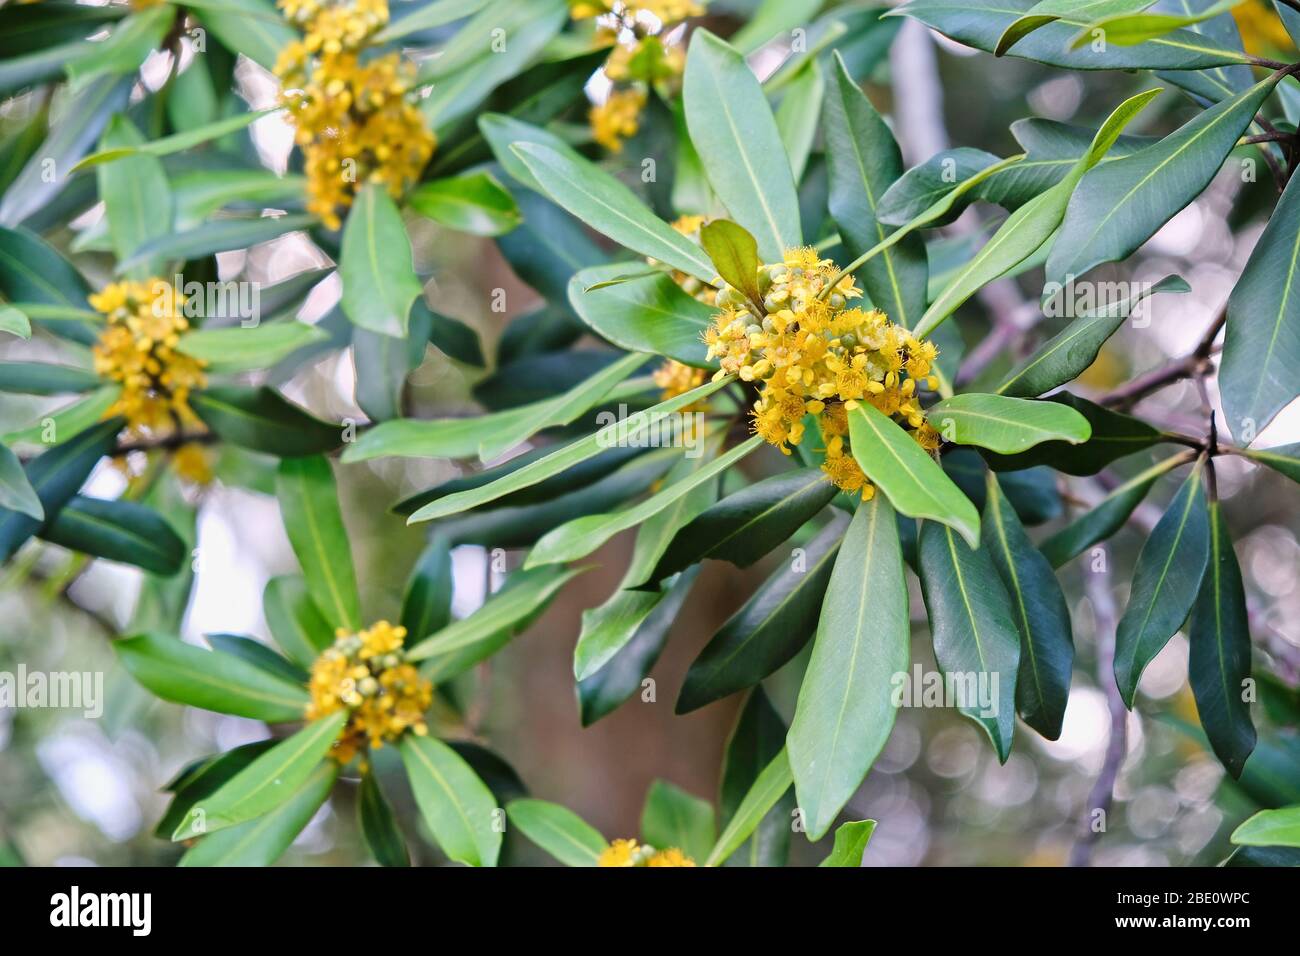 Water gum flowers and leaves in closeup. A native Australian plant. Stock Photo